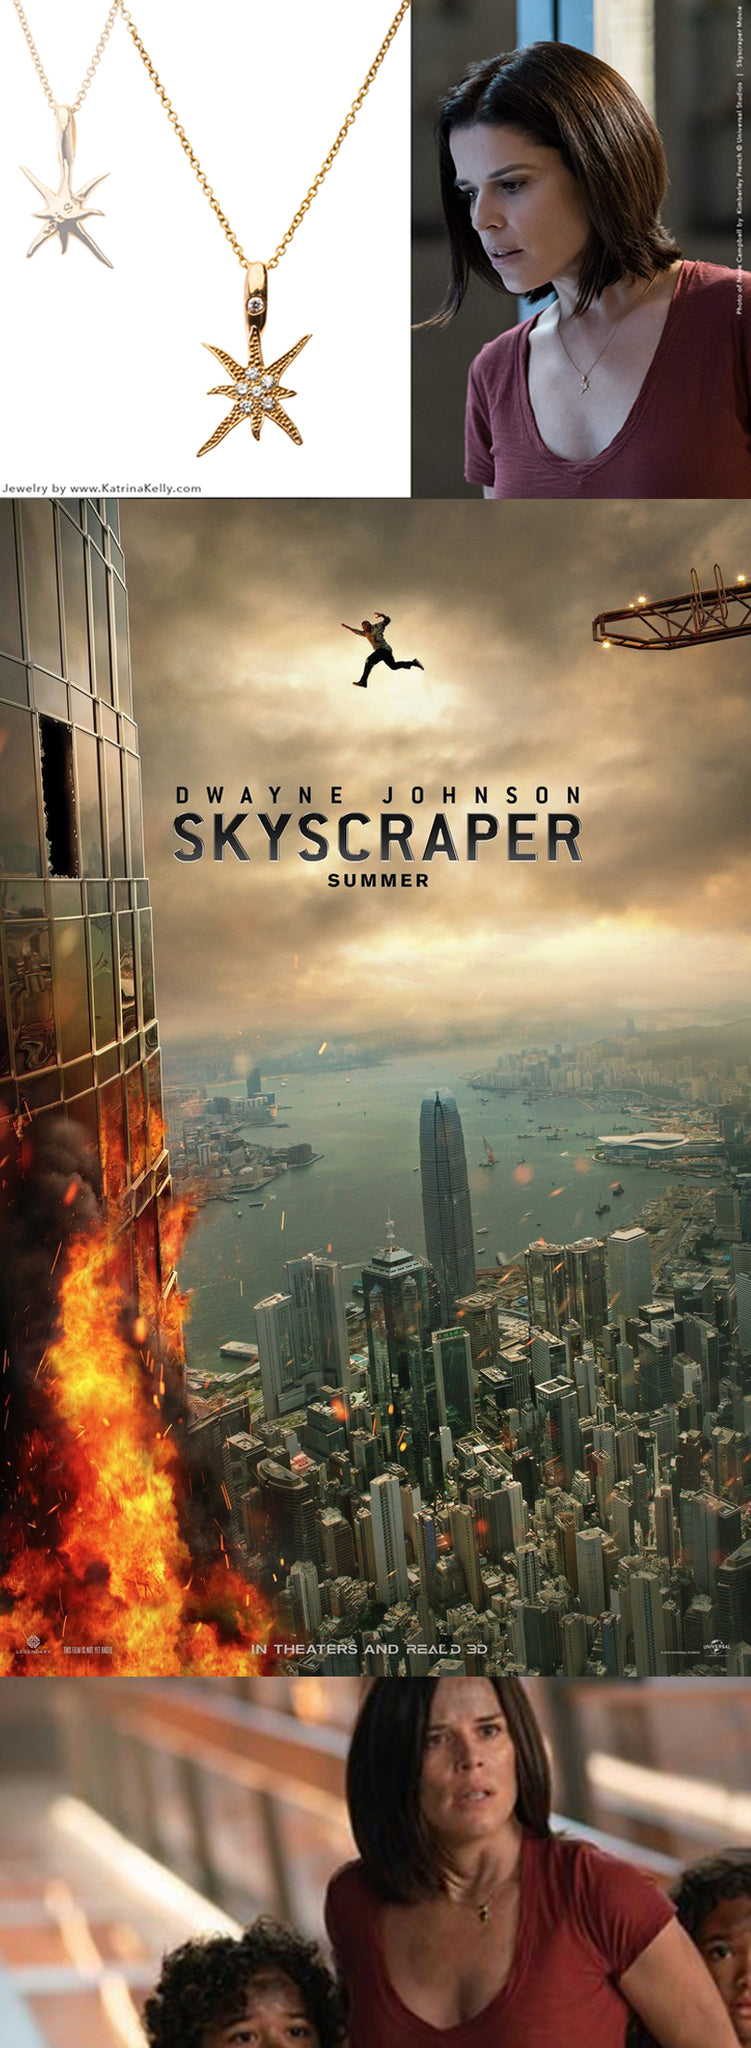 The new summer blockbuster Skyscraper starring Dwayne “The Rock” Johnson and Neve Campbell has arrived in theaters!